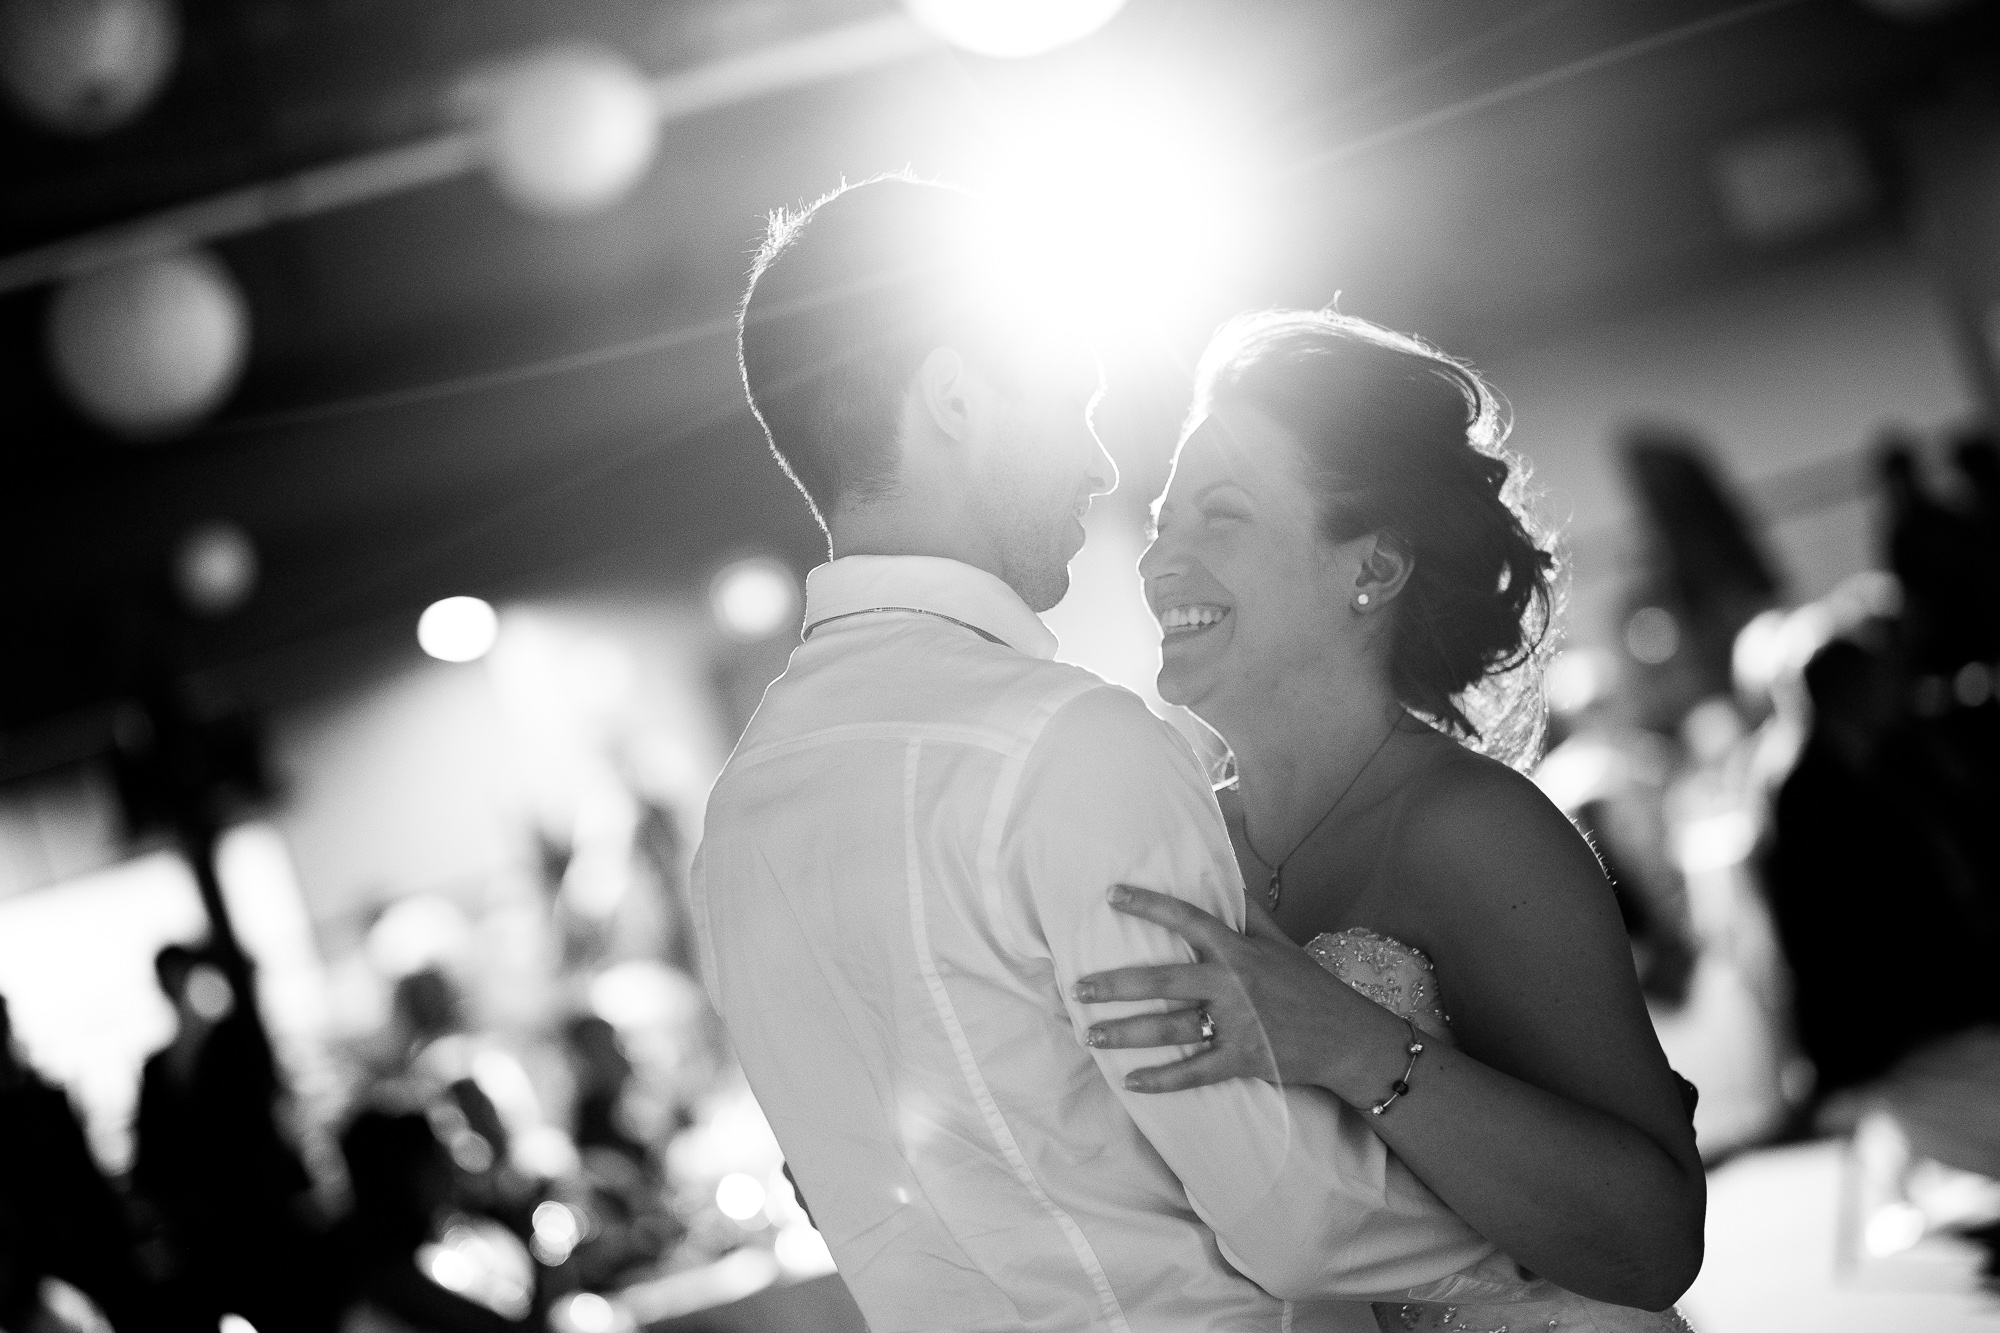  I love it when people are smiling in wedding photographs (I'll take happy crying as well) so obviously I love this picture from Kaylen and Roberts wedding this spring at Federation Hall in Waterloo.  You can see the joy on Kaylen's face as she enjoy